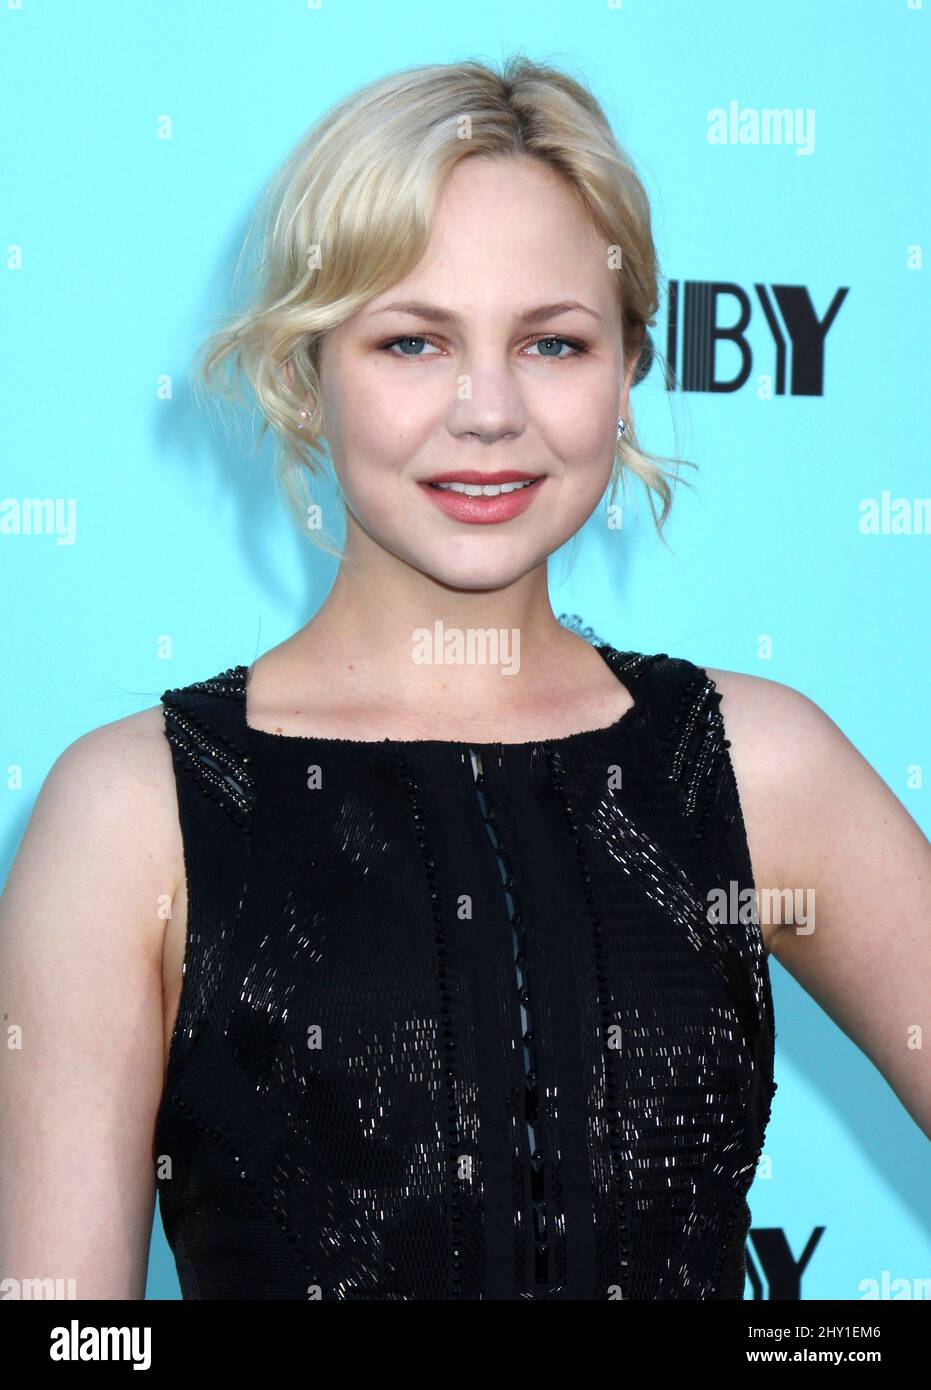 Adelaide Clemens attending the premiere of 